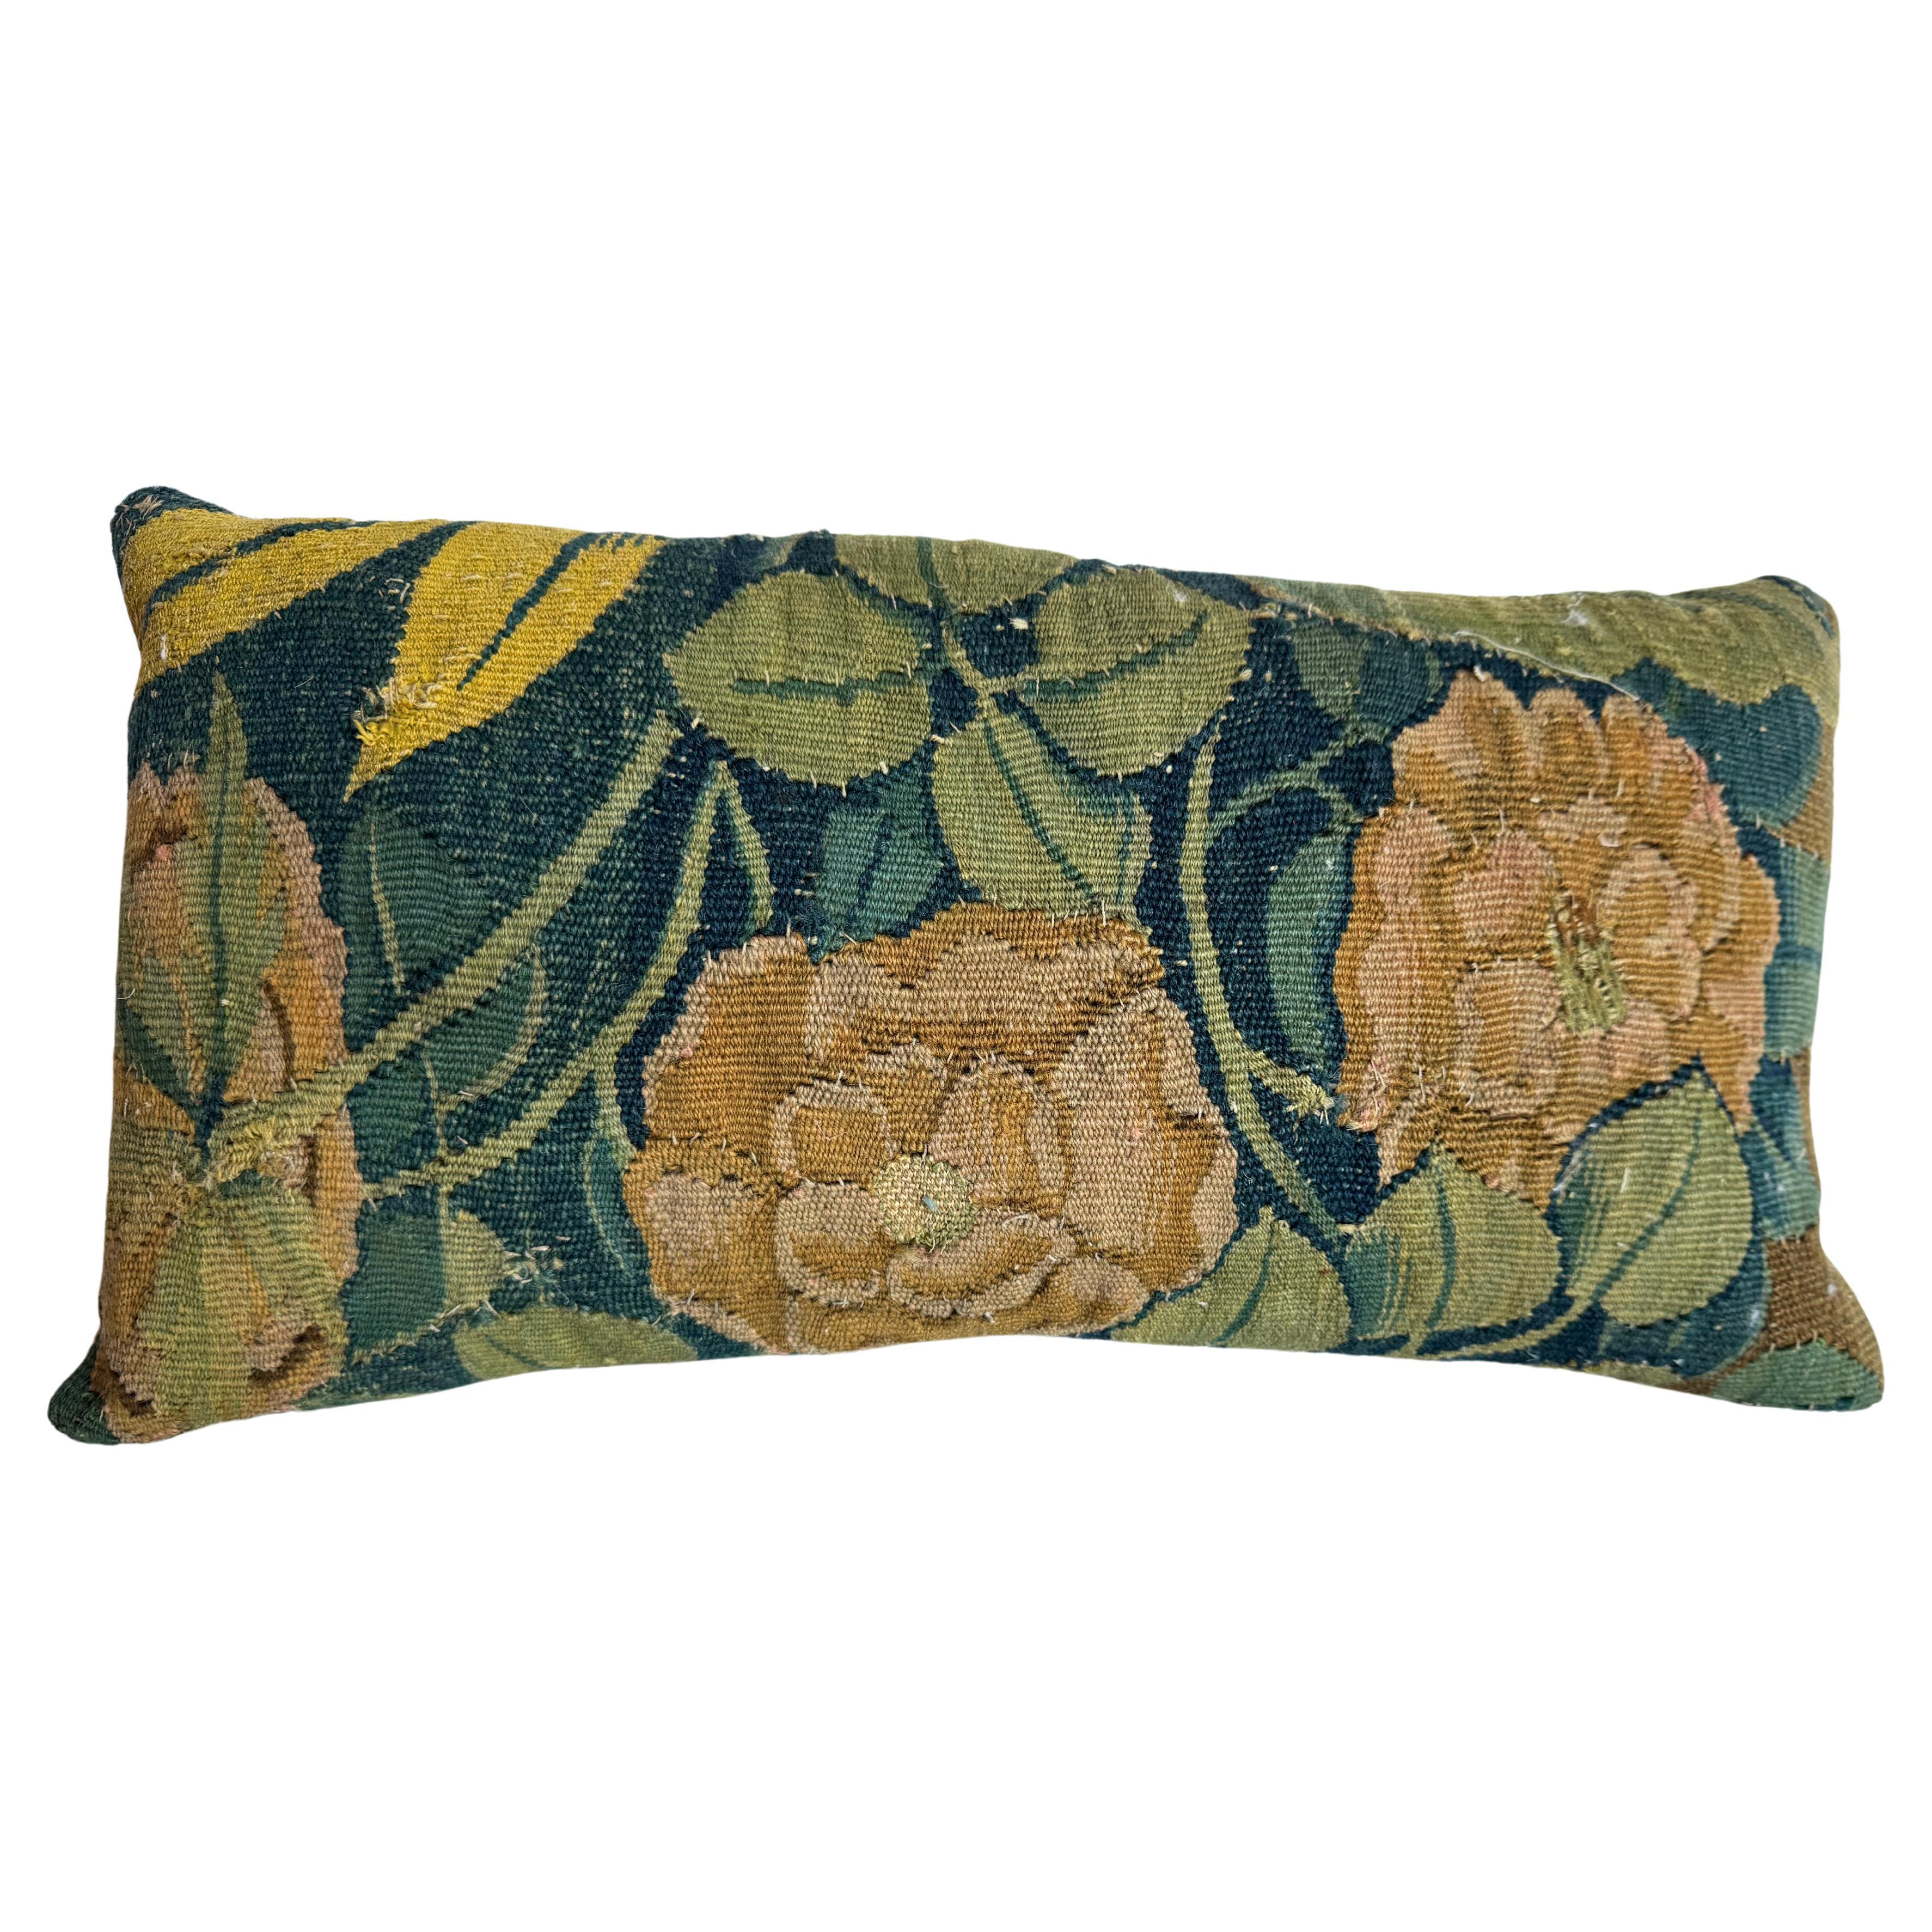  Brussels 16th Century Pillow - 19" X 10" For Sale